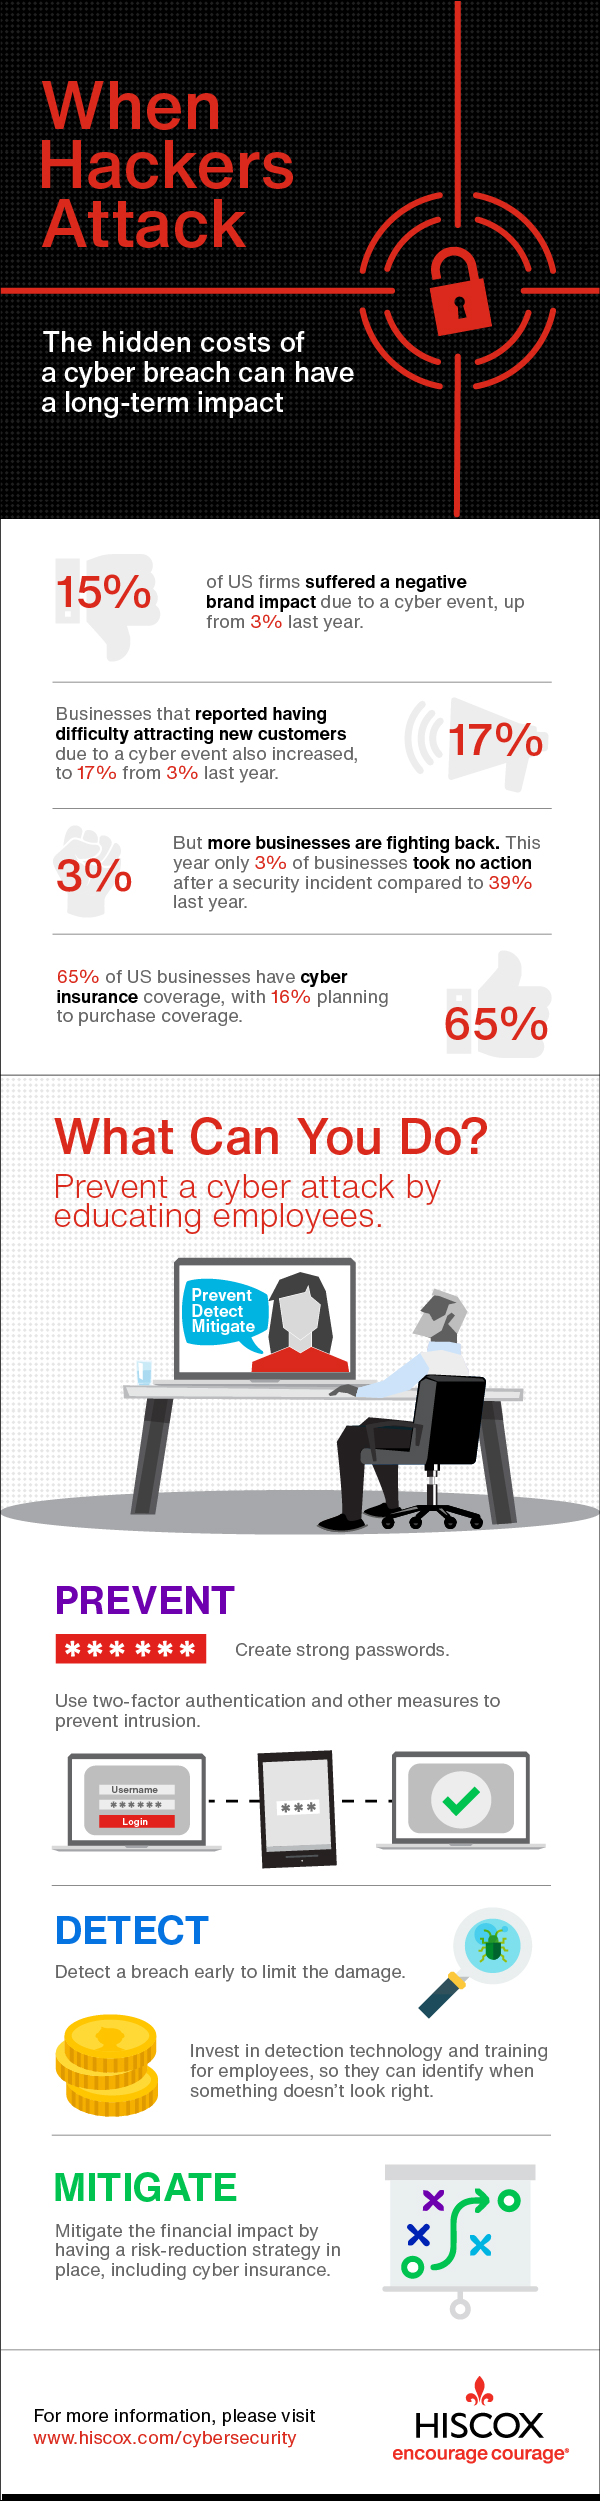 Hiscox Cyber Readiness Report 2020 Infographic